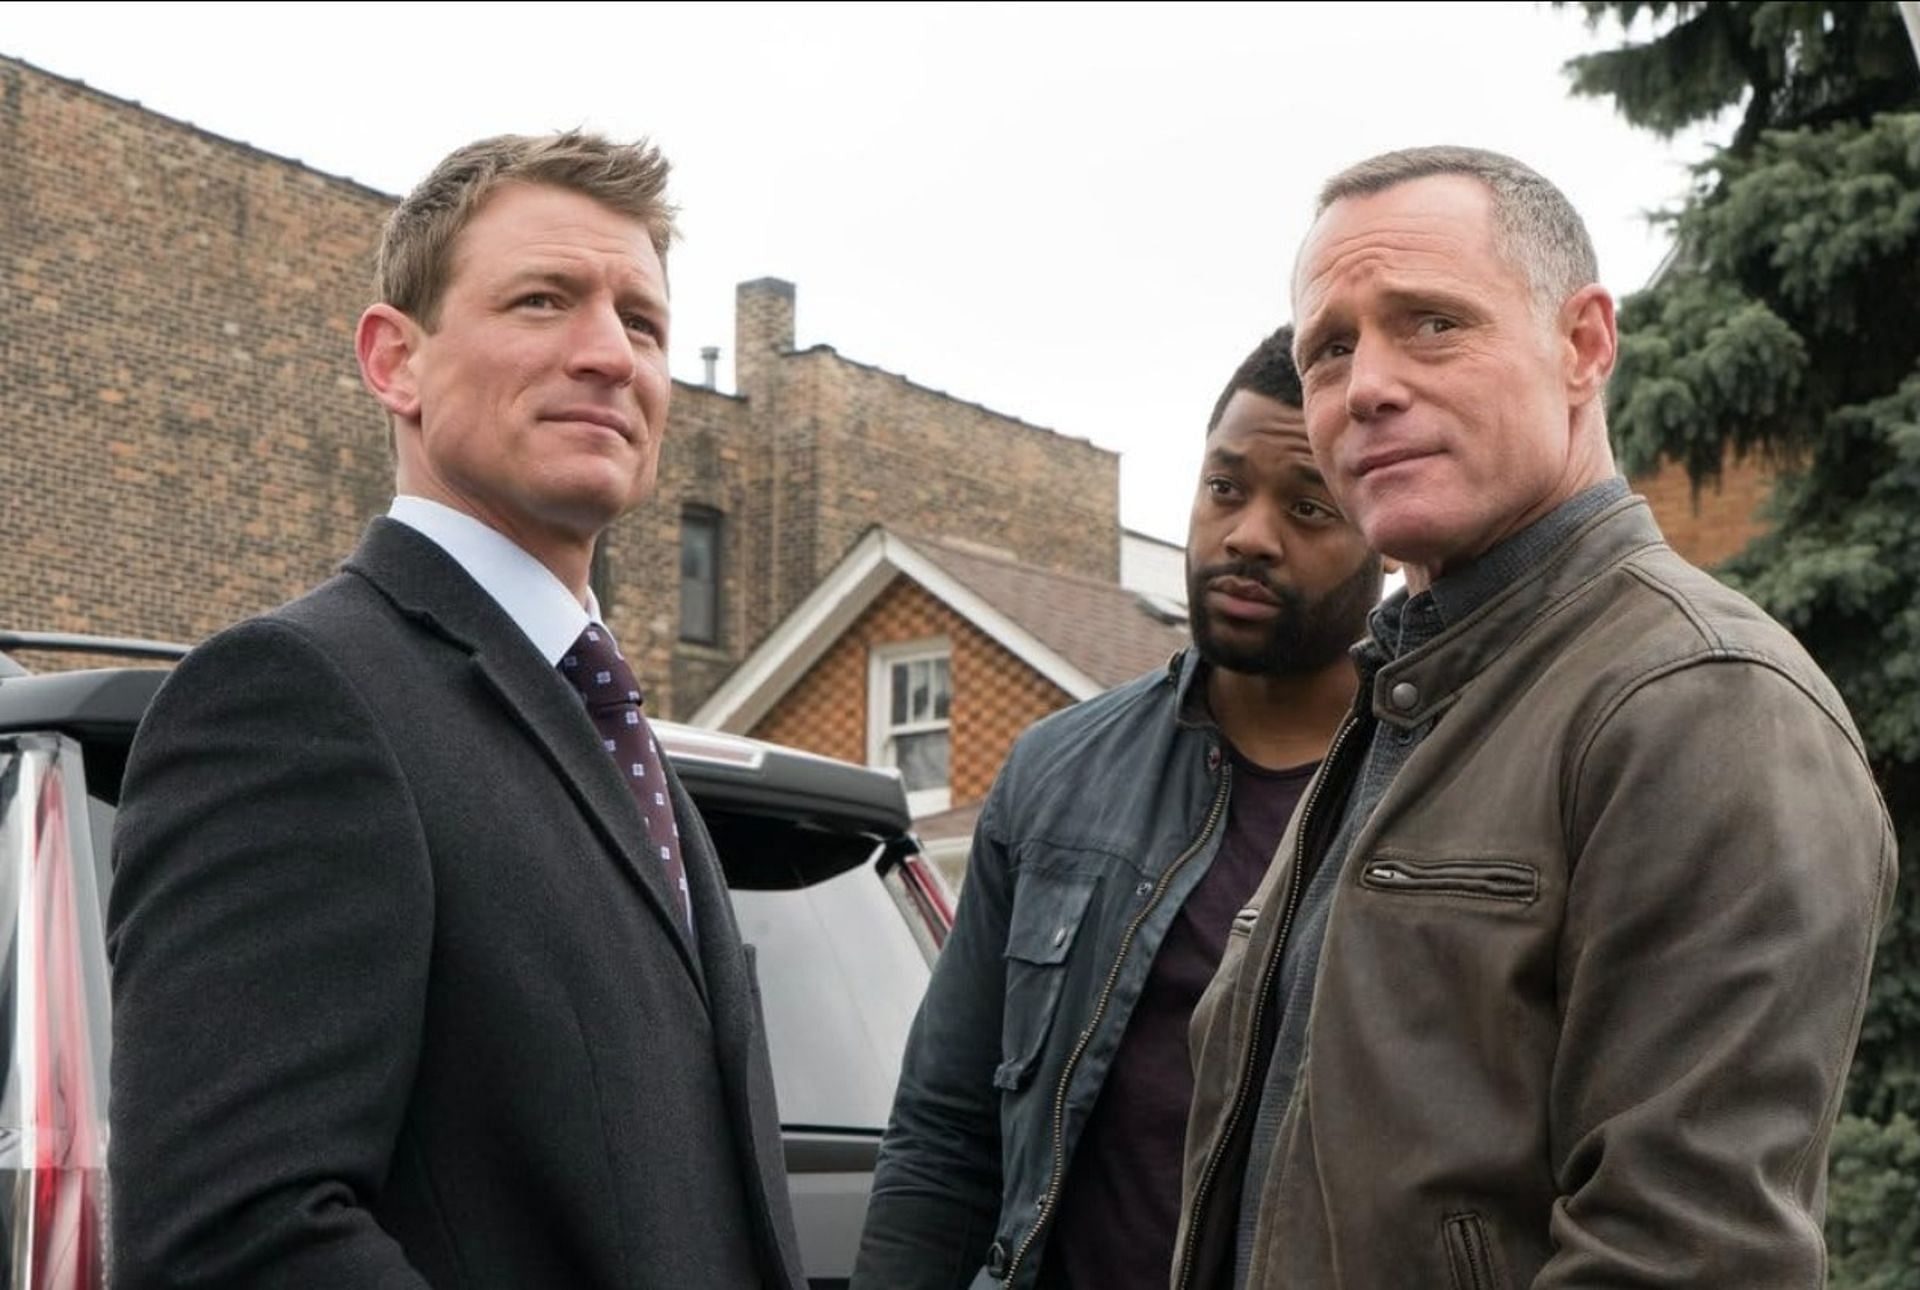 Jason Beghe, Philip Winchester, and LaRoyce Hawkins in a scene from Chicago P.D. (Image via IMDb)